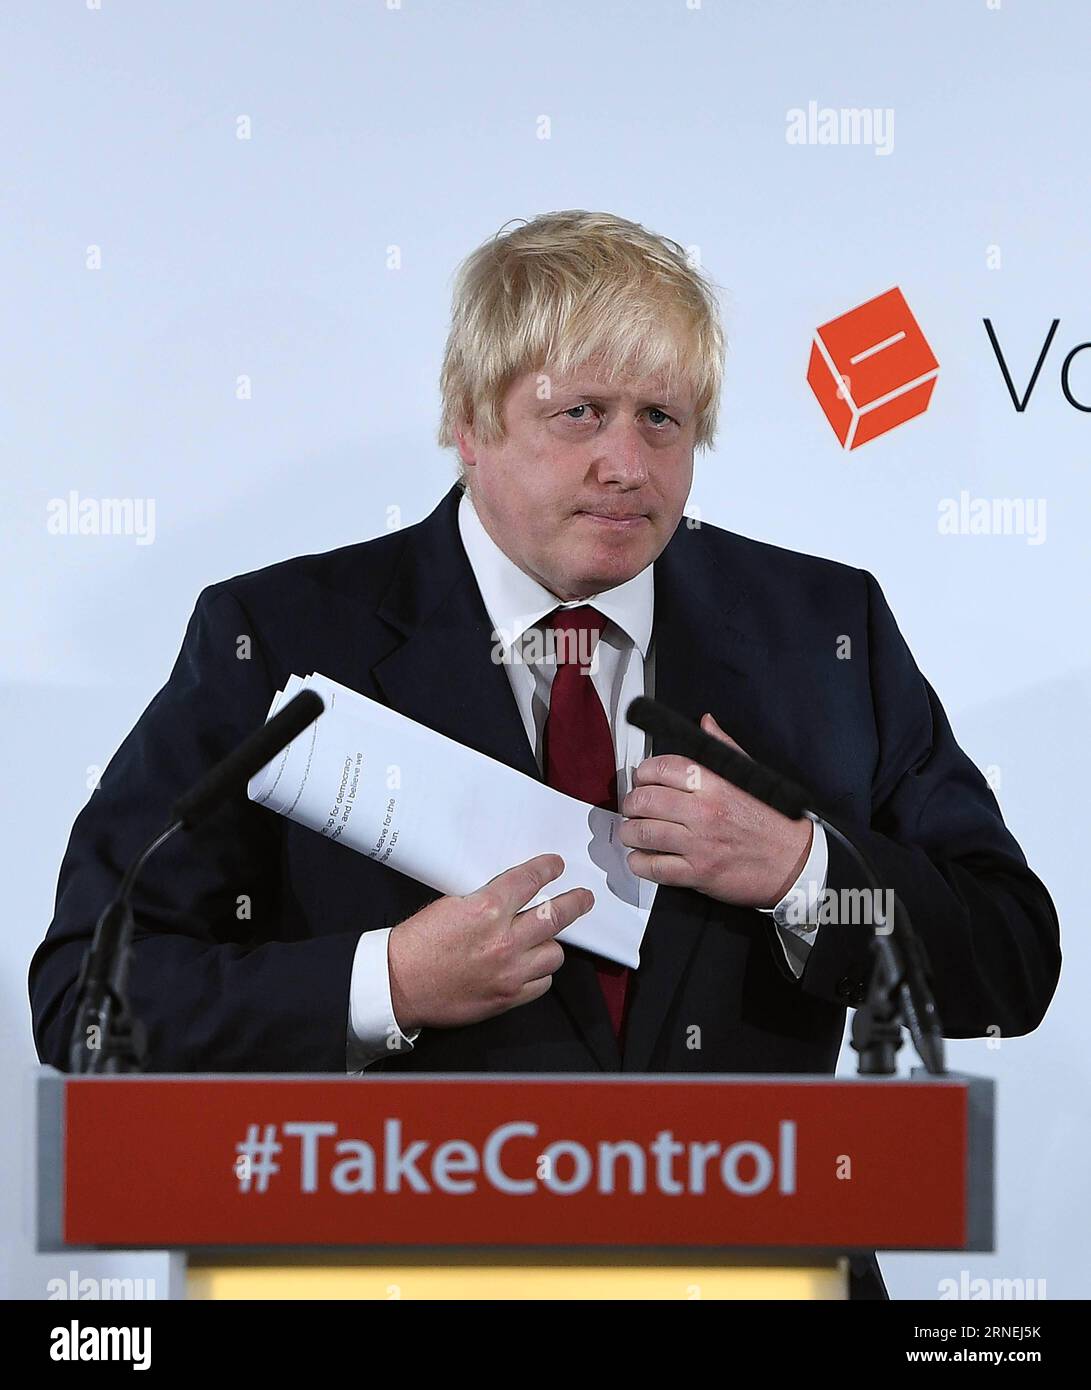 (160624) -- LONDON, June 24, 2016 () -- Former London Mayor and Vote Leave campaigner Boris Johnson attends a press conference in London, Britain, June 24, 2016. The Leave camp has won Britain s Brexit referendum on Friday morning by obtaining nearly 52 percent of ballots, pulling the country out of the 28-nation European Union (EU) after its 43-year membership. () BRITAIN-LONDON-BREXIT-BORIS JOHNSON Xinhua PUBLICATIONxNOTxINxCHN   160624 London June 24 2016 Former London Mayor and VOTE Leave Campaigner Boris Johnson Attends a Press Conference in London Britain June 24 2016 The Leave Camp has Stock Photo